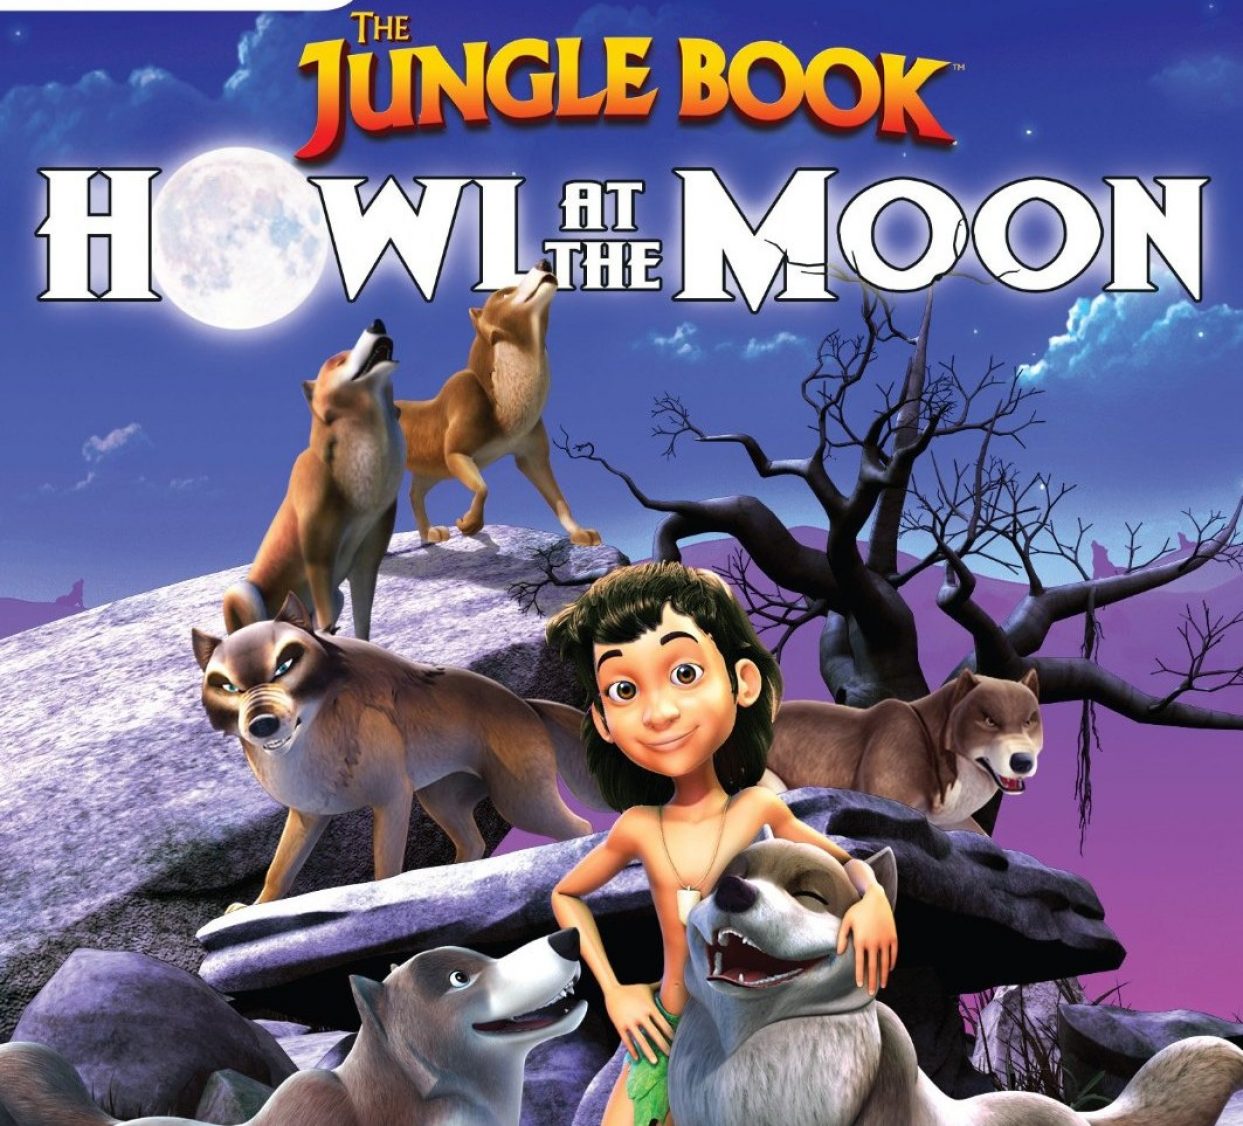 The Jungle Book: Howl at the Moon (2015)